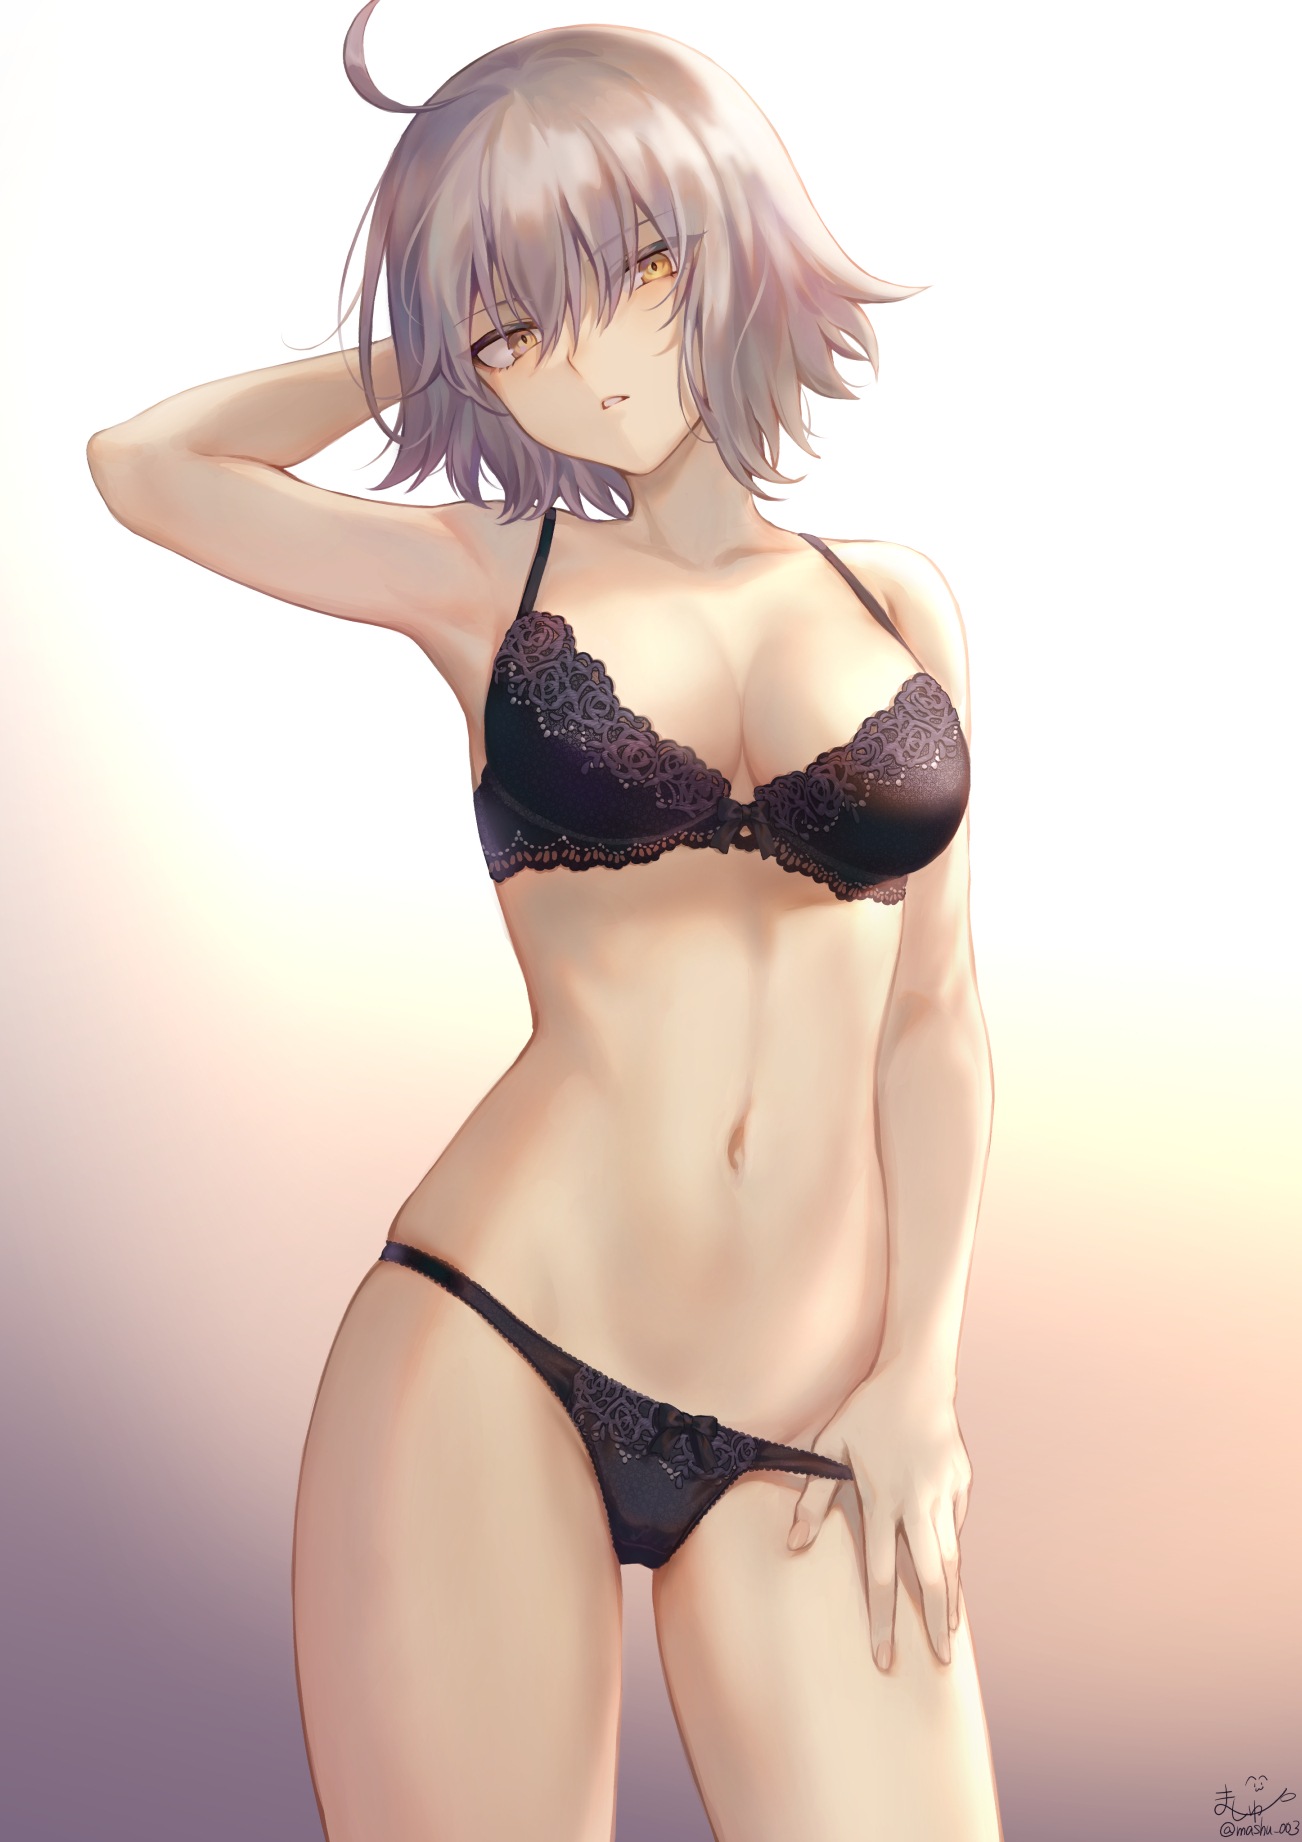 Sexy girls of anime posing in hot lingerie and stockings image picture